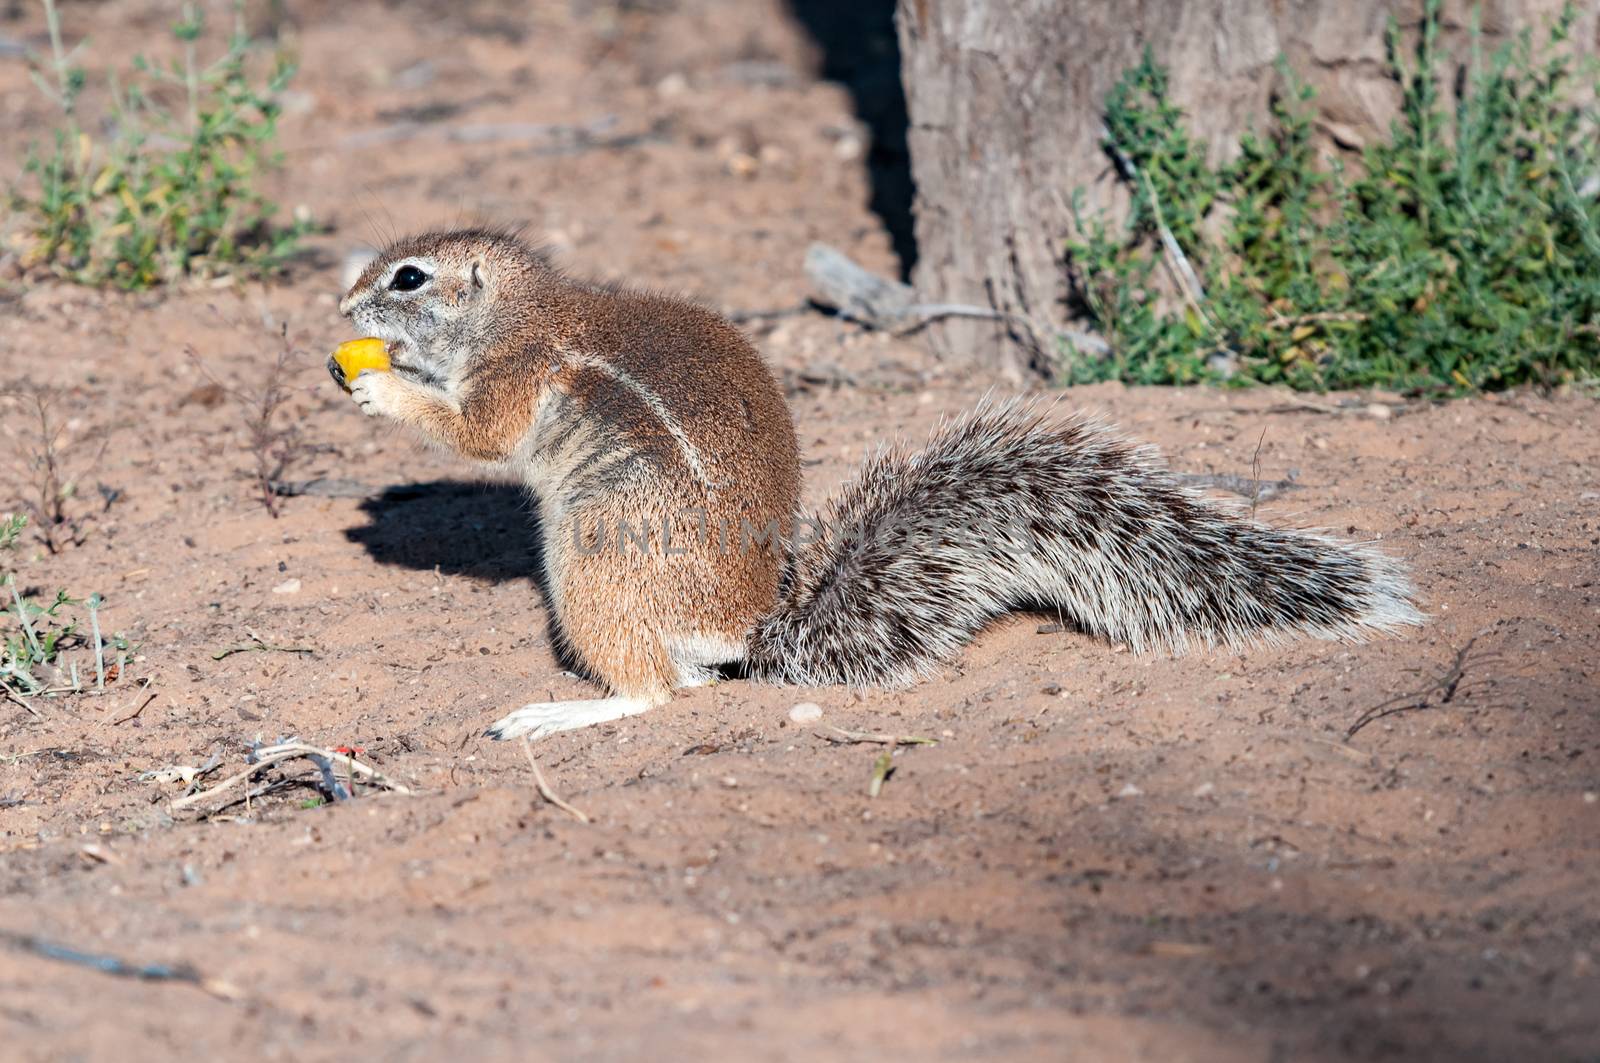 A cape ground squirrel, Xerus inauris, eating a piece of fruit in the Kgalagadi